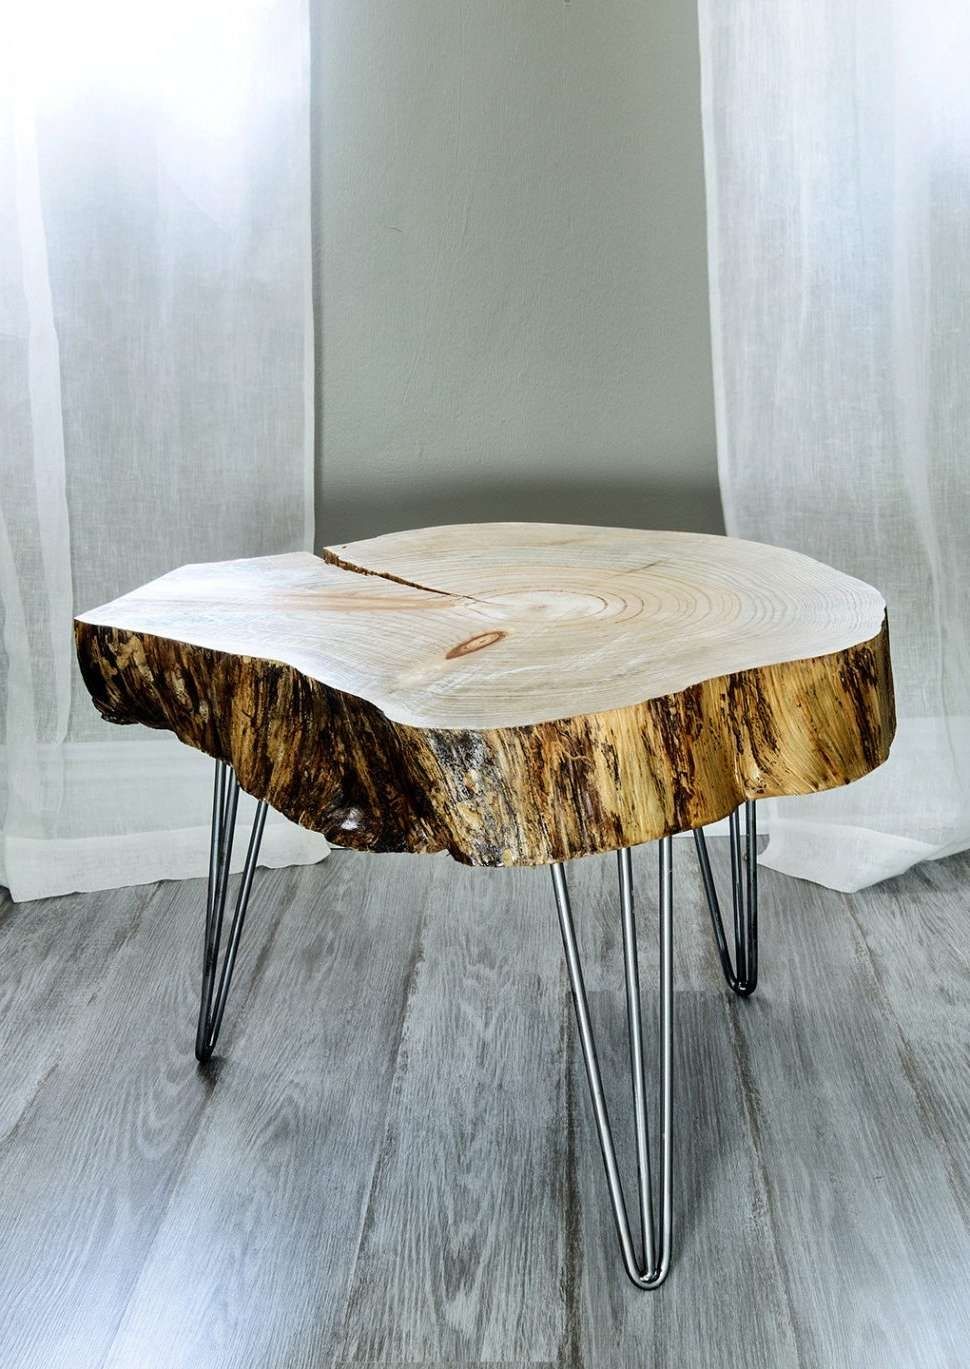 Coffee Table : Tree Trunk Coffee Table Bases Tables End Diy For Intended For Most Current Tree Trunk Coffee Table (View 7 of 20)